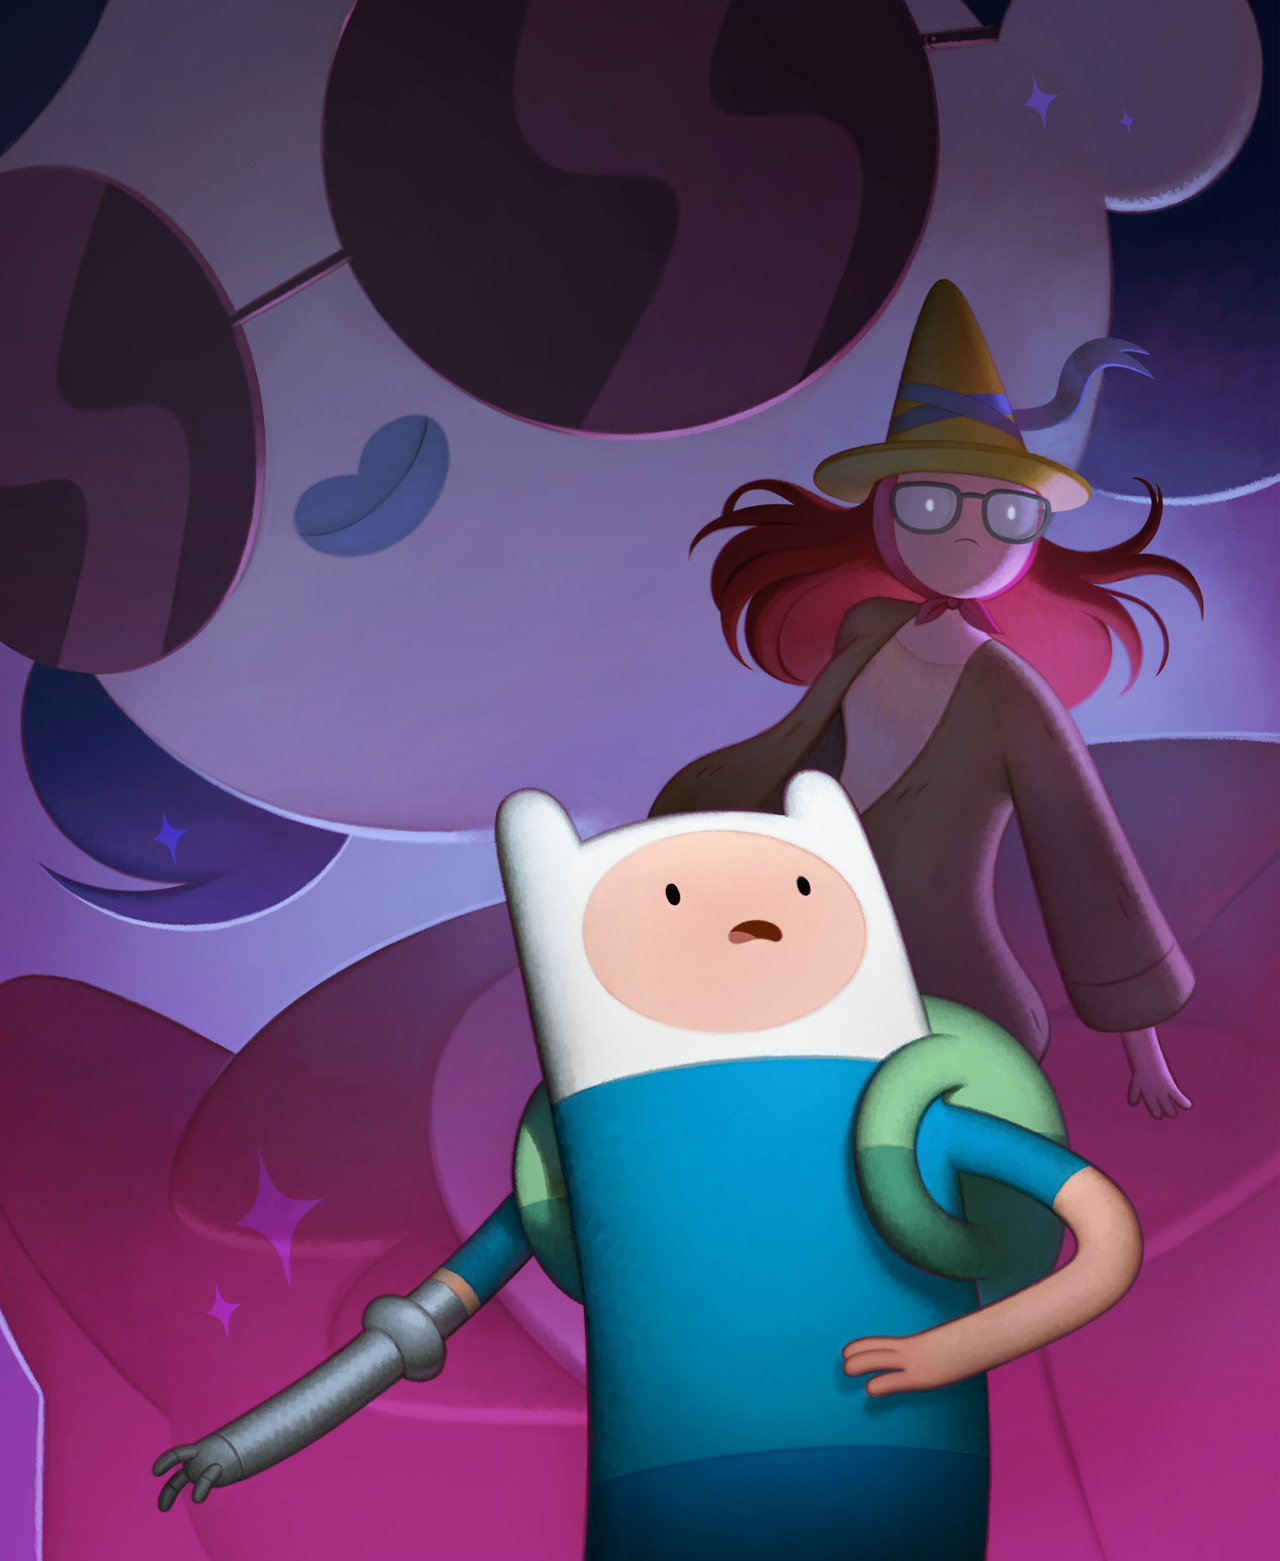 Adventure Time: Elements cover artwork designed and painted by character &amp;